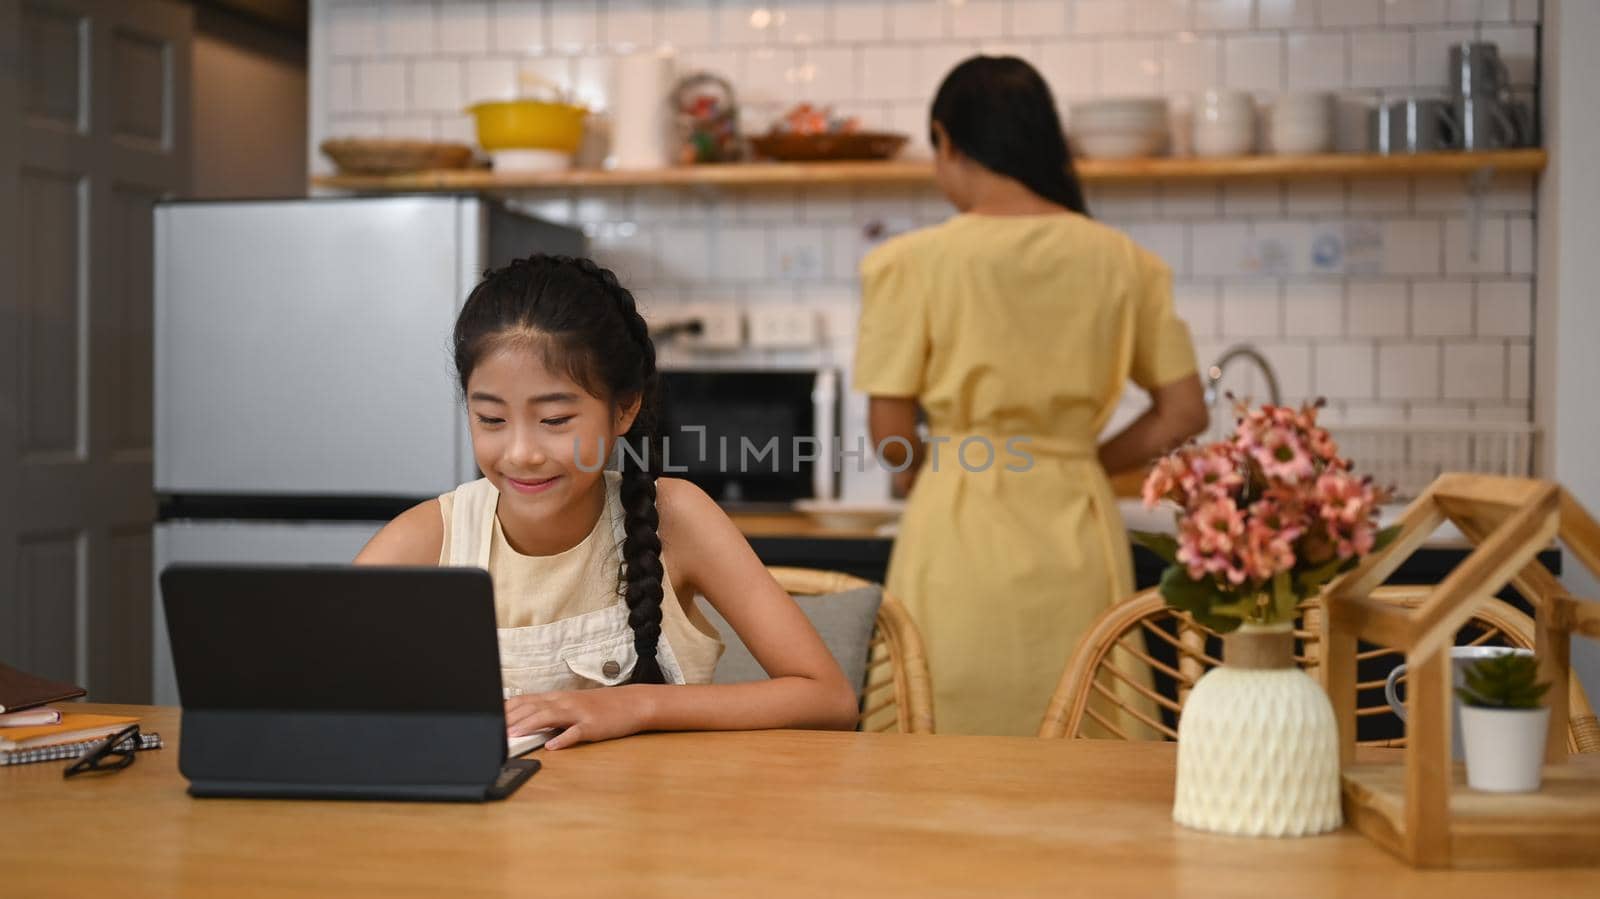 Asian girl having online class on computer tablet, doing homework at kitchen table. Concept of virtual education, homeschooling.